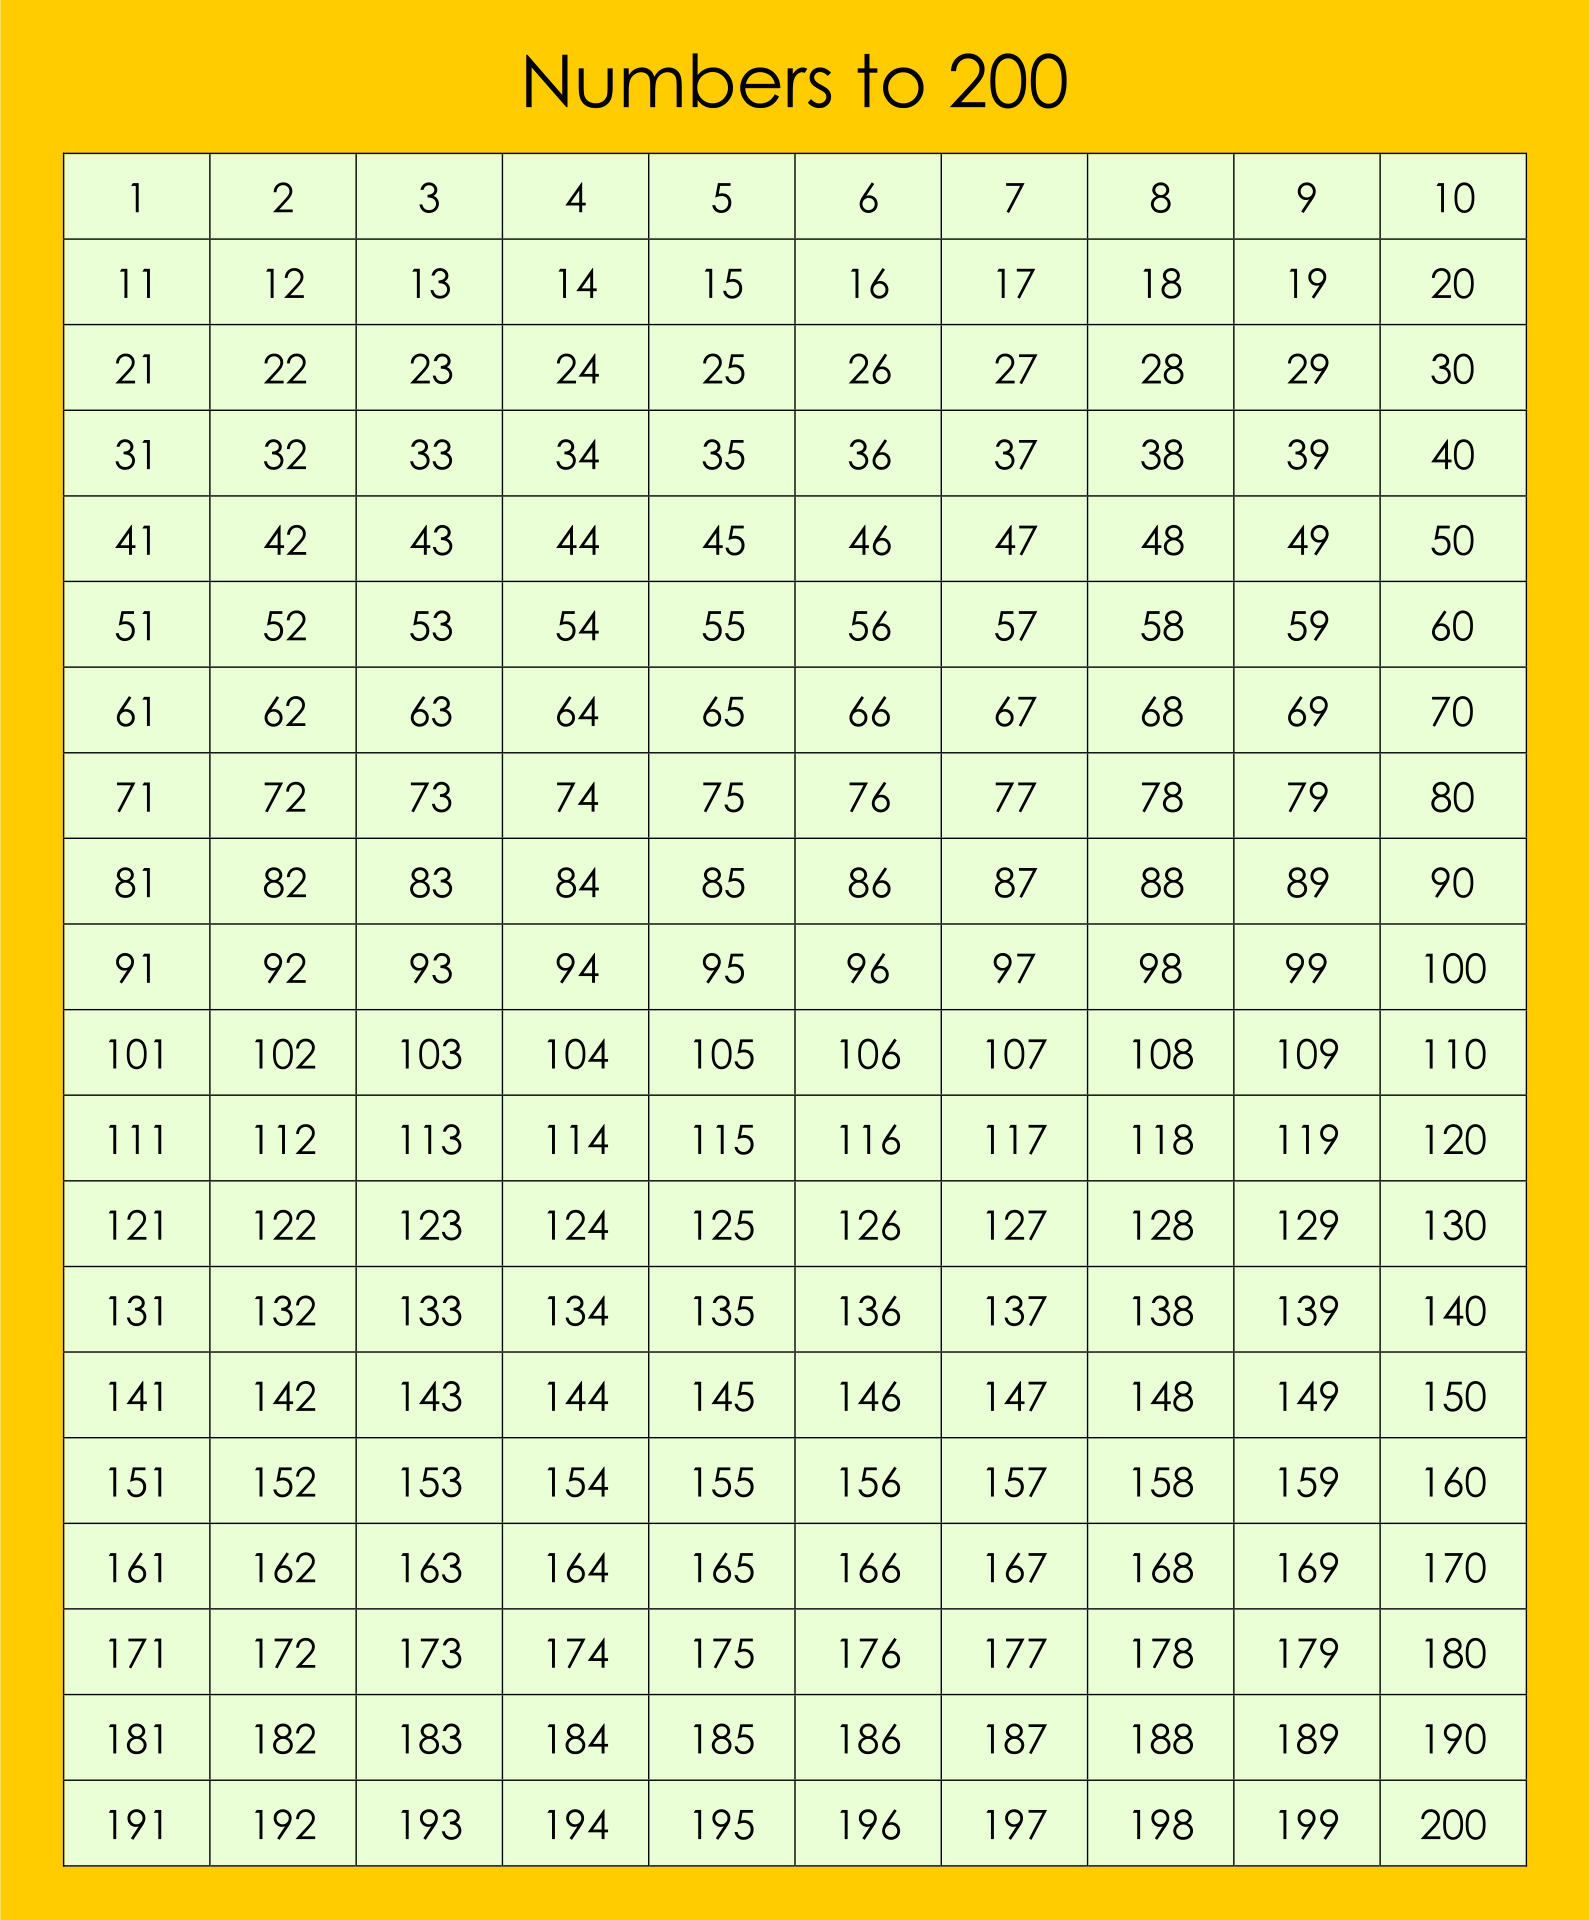 8-best-images-of-number-chart-1-500-printable-printable-number-chart